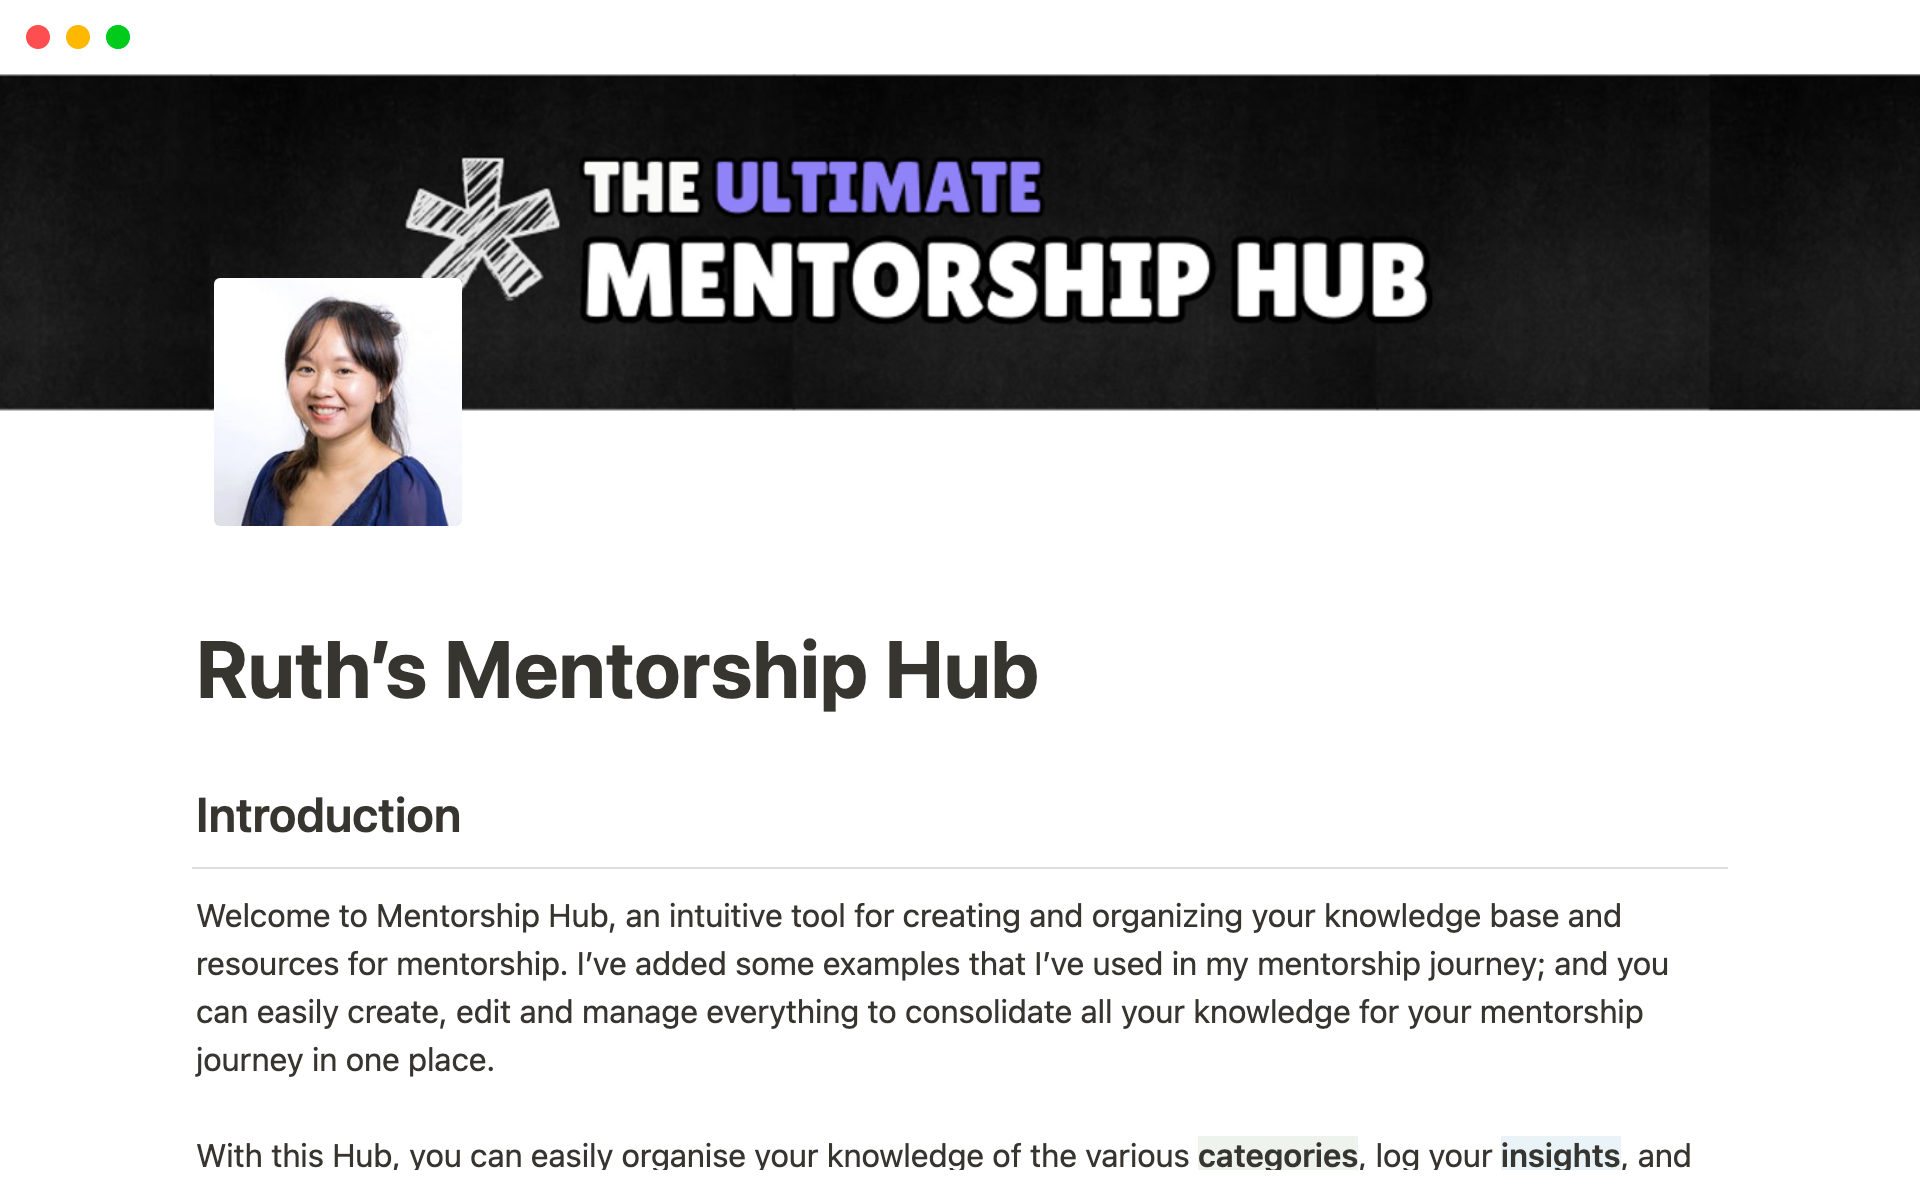 Mentorship Hub is an intuitive tool for creating and organizing your knowledge base and resources for mentorship.